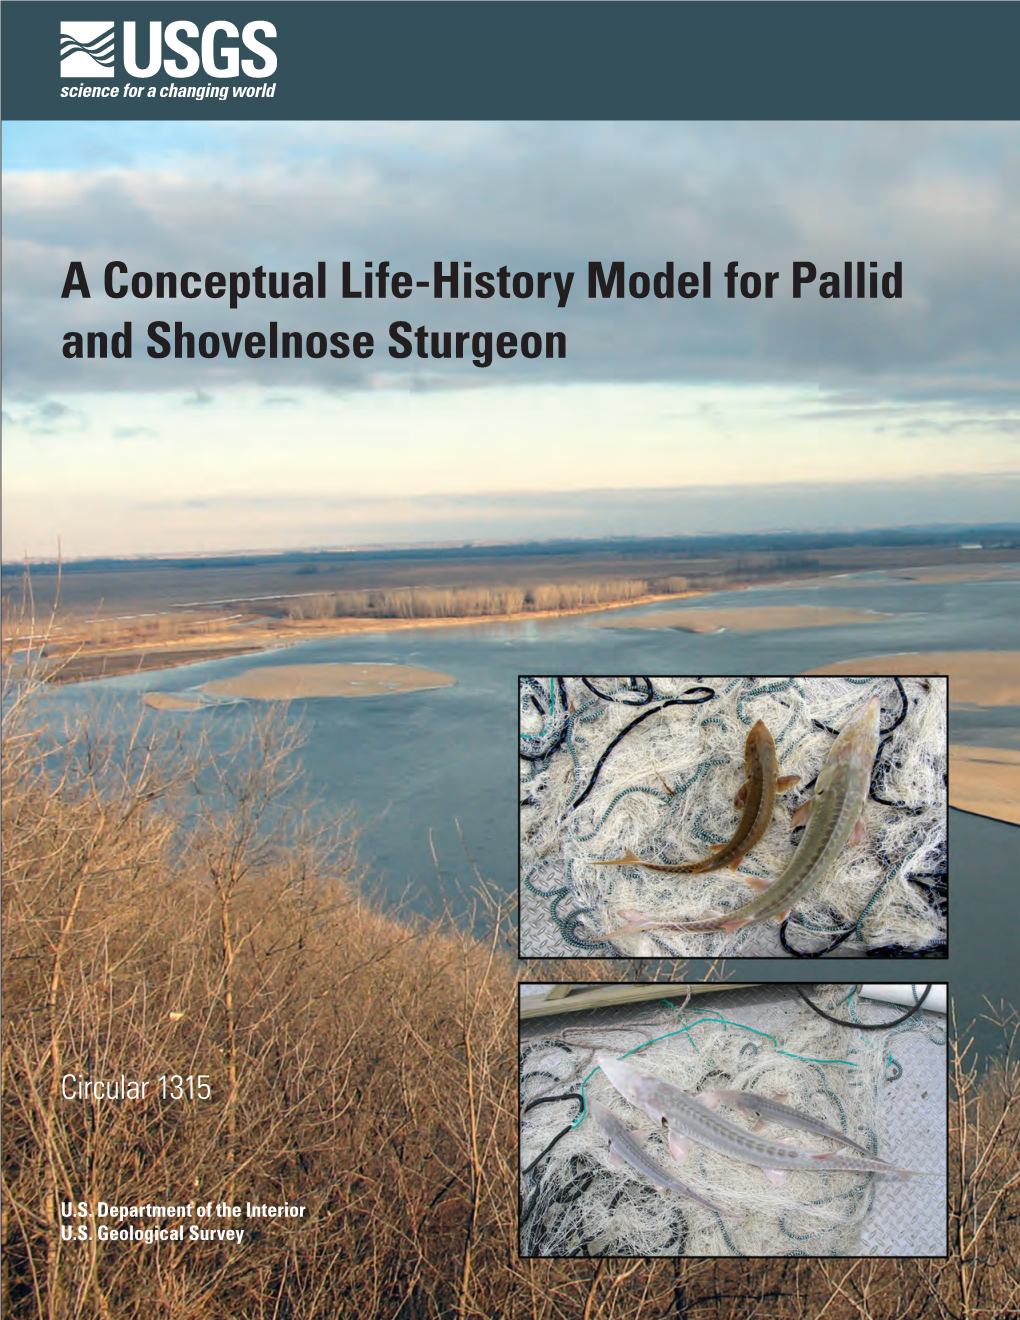 A Conceptual Life-History Model for Pallid and Shovelnose Sturgeon